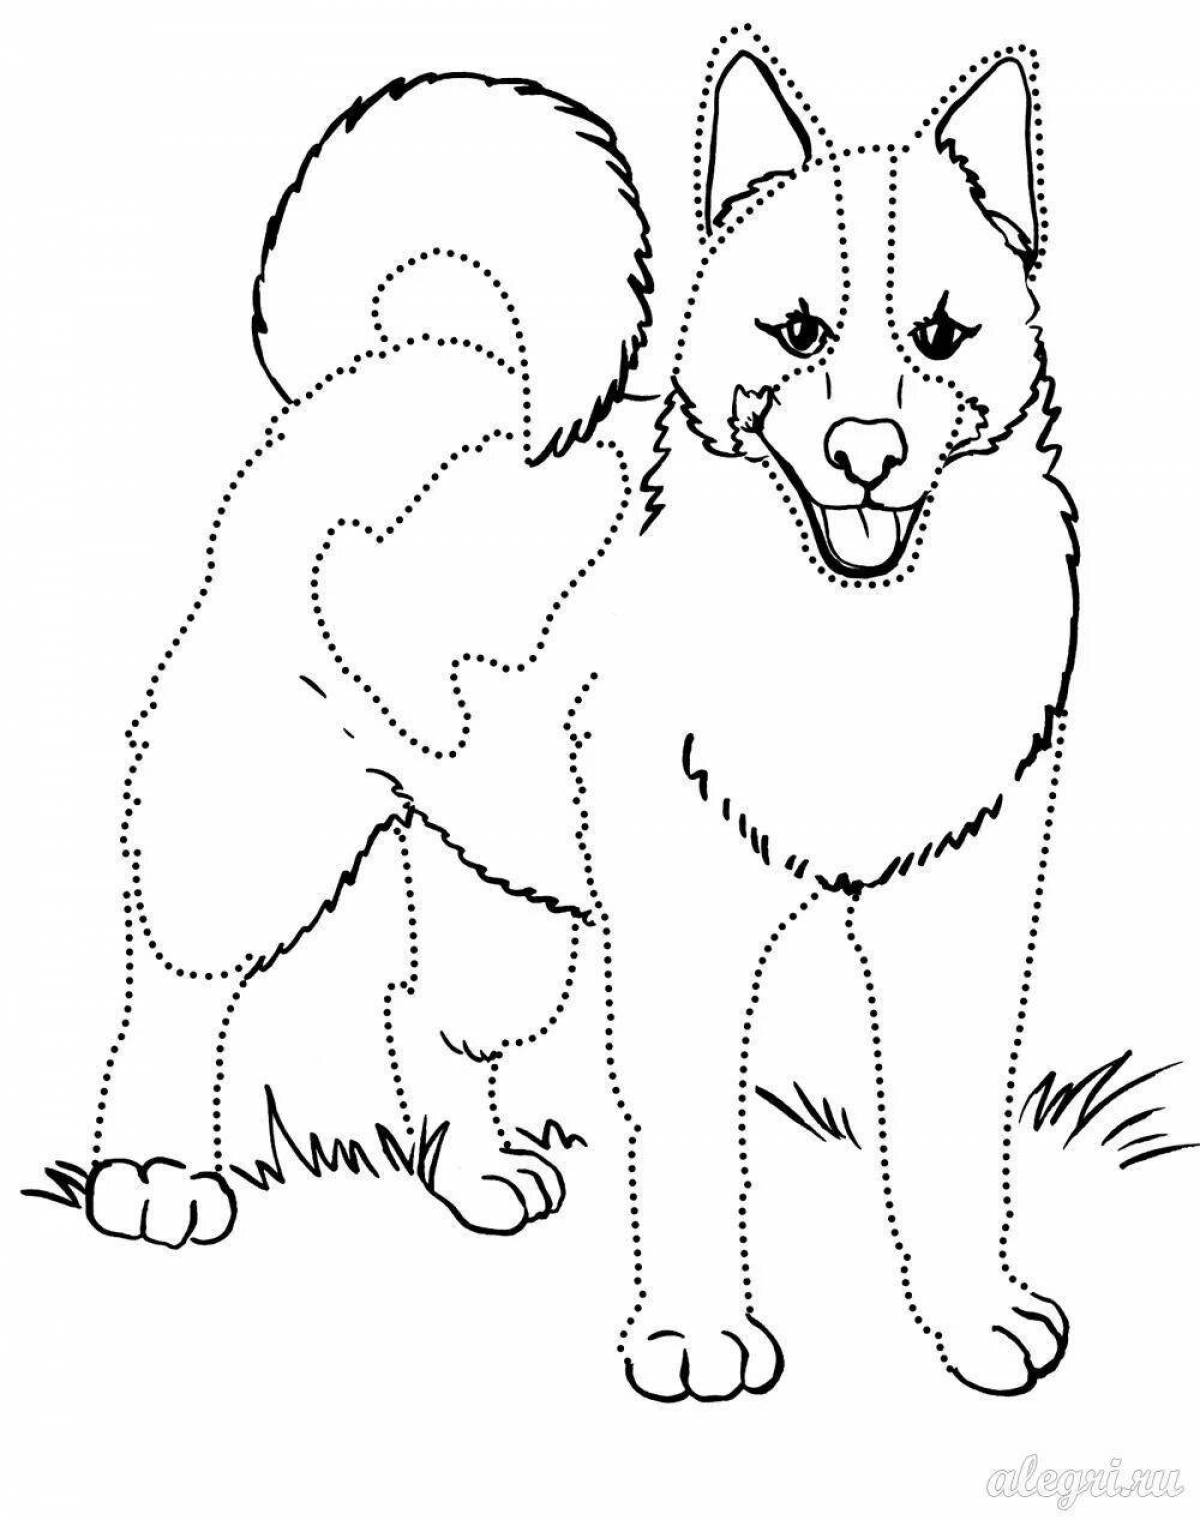 Playful pet coloring book for 5-7 year olds